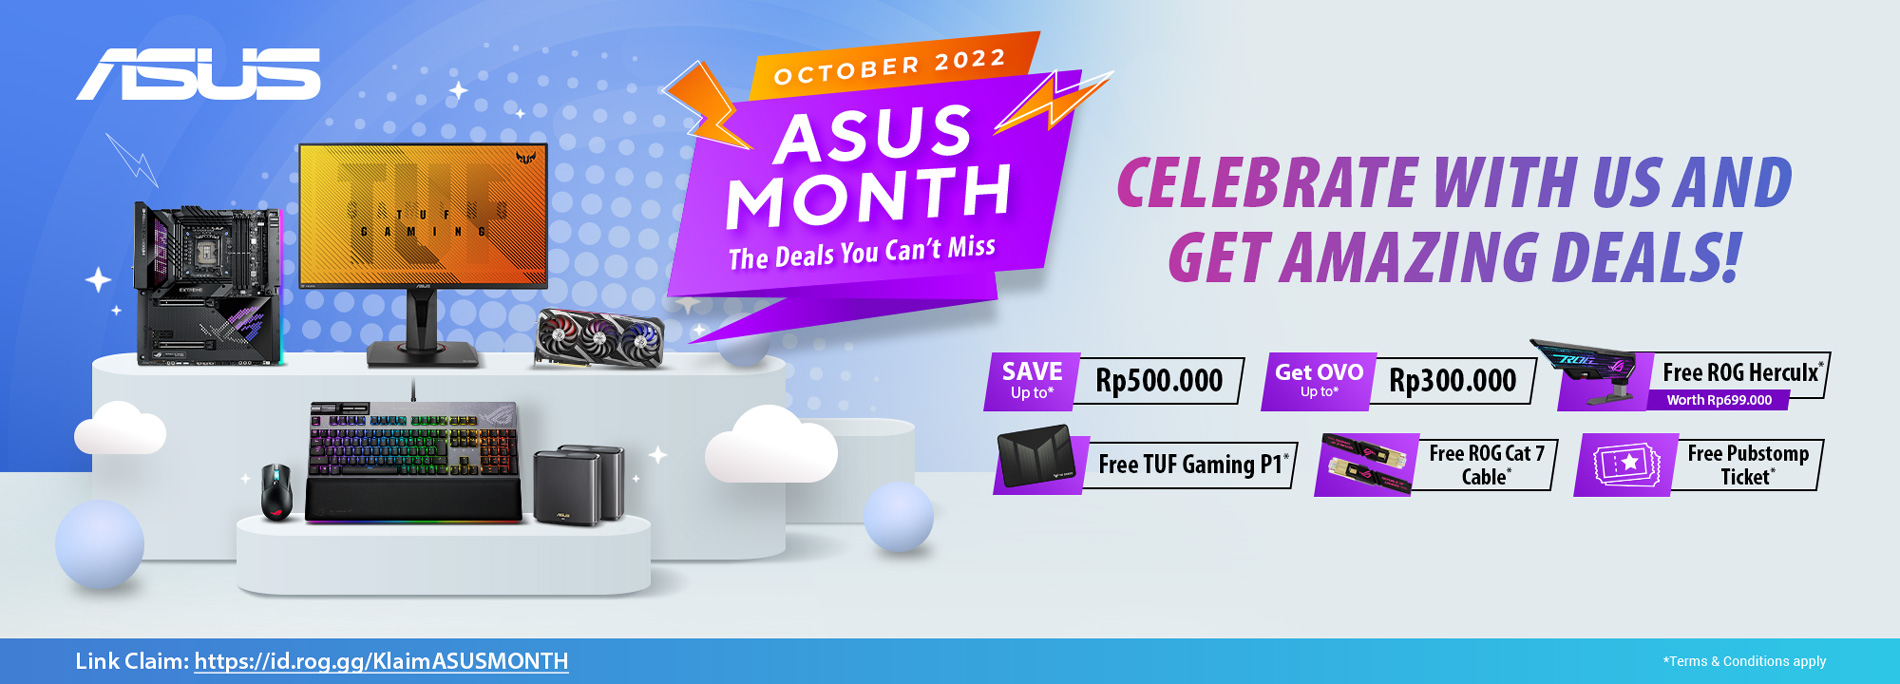 ASUS MONTH - OCTOBER PROMOTION 01-31 October 2022